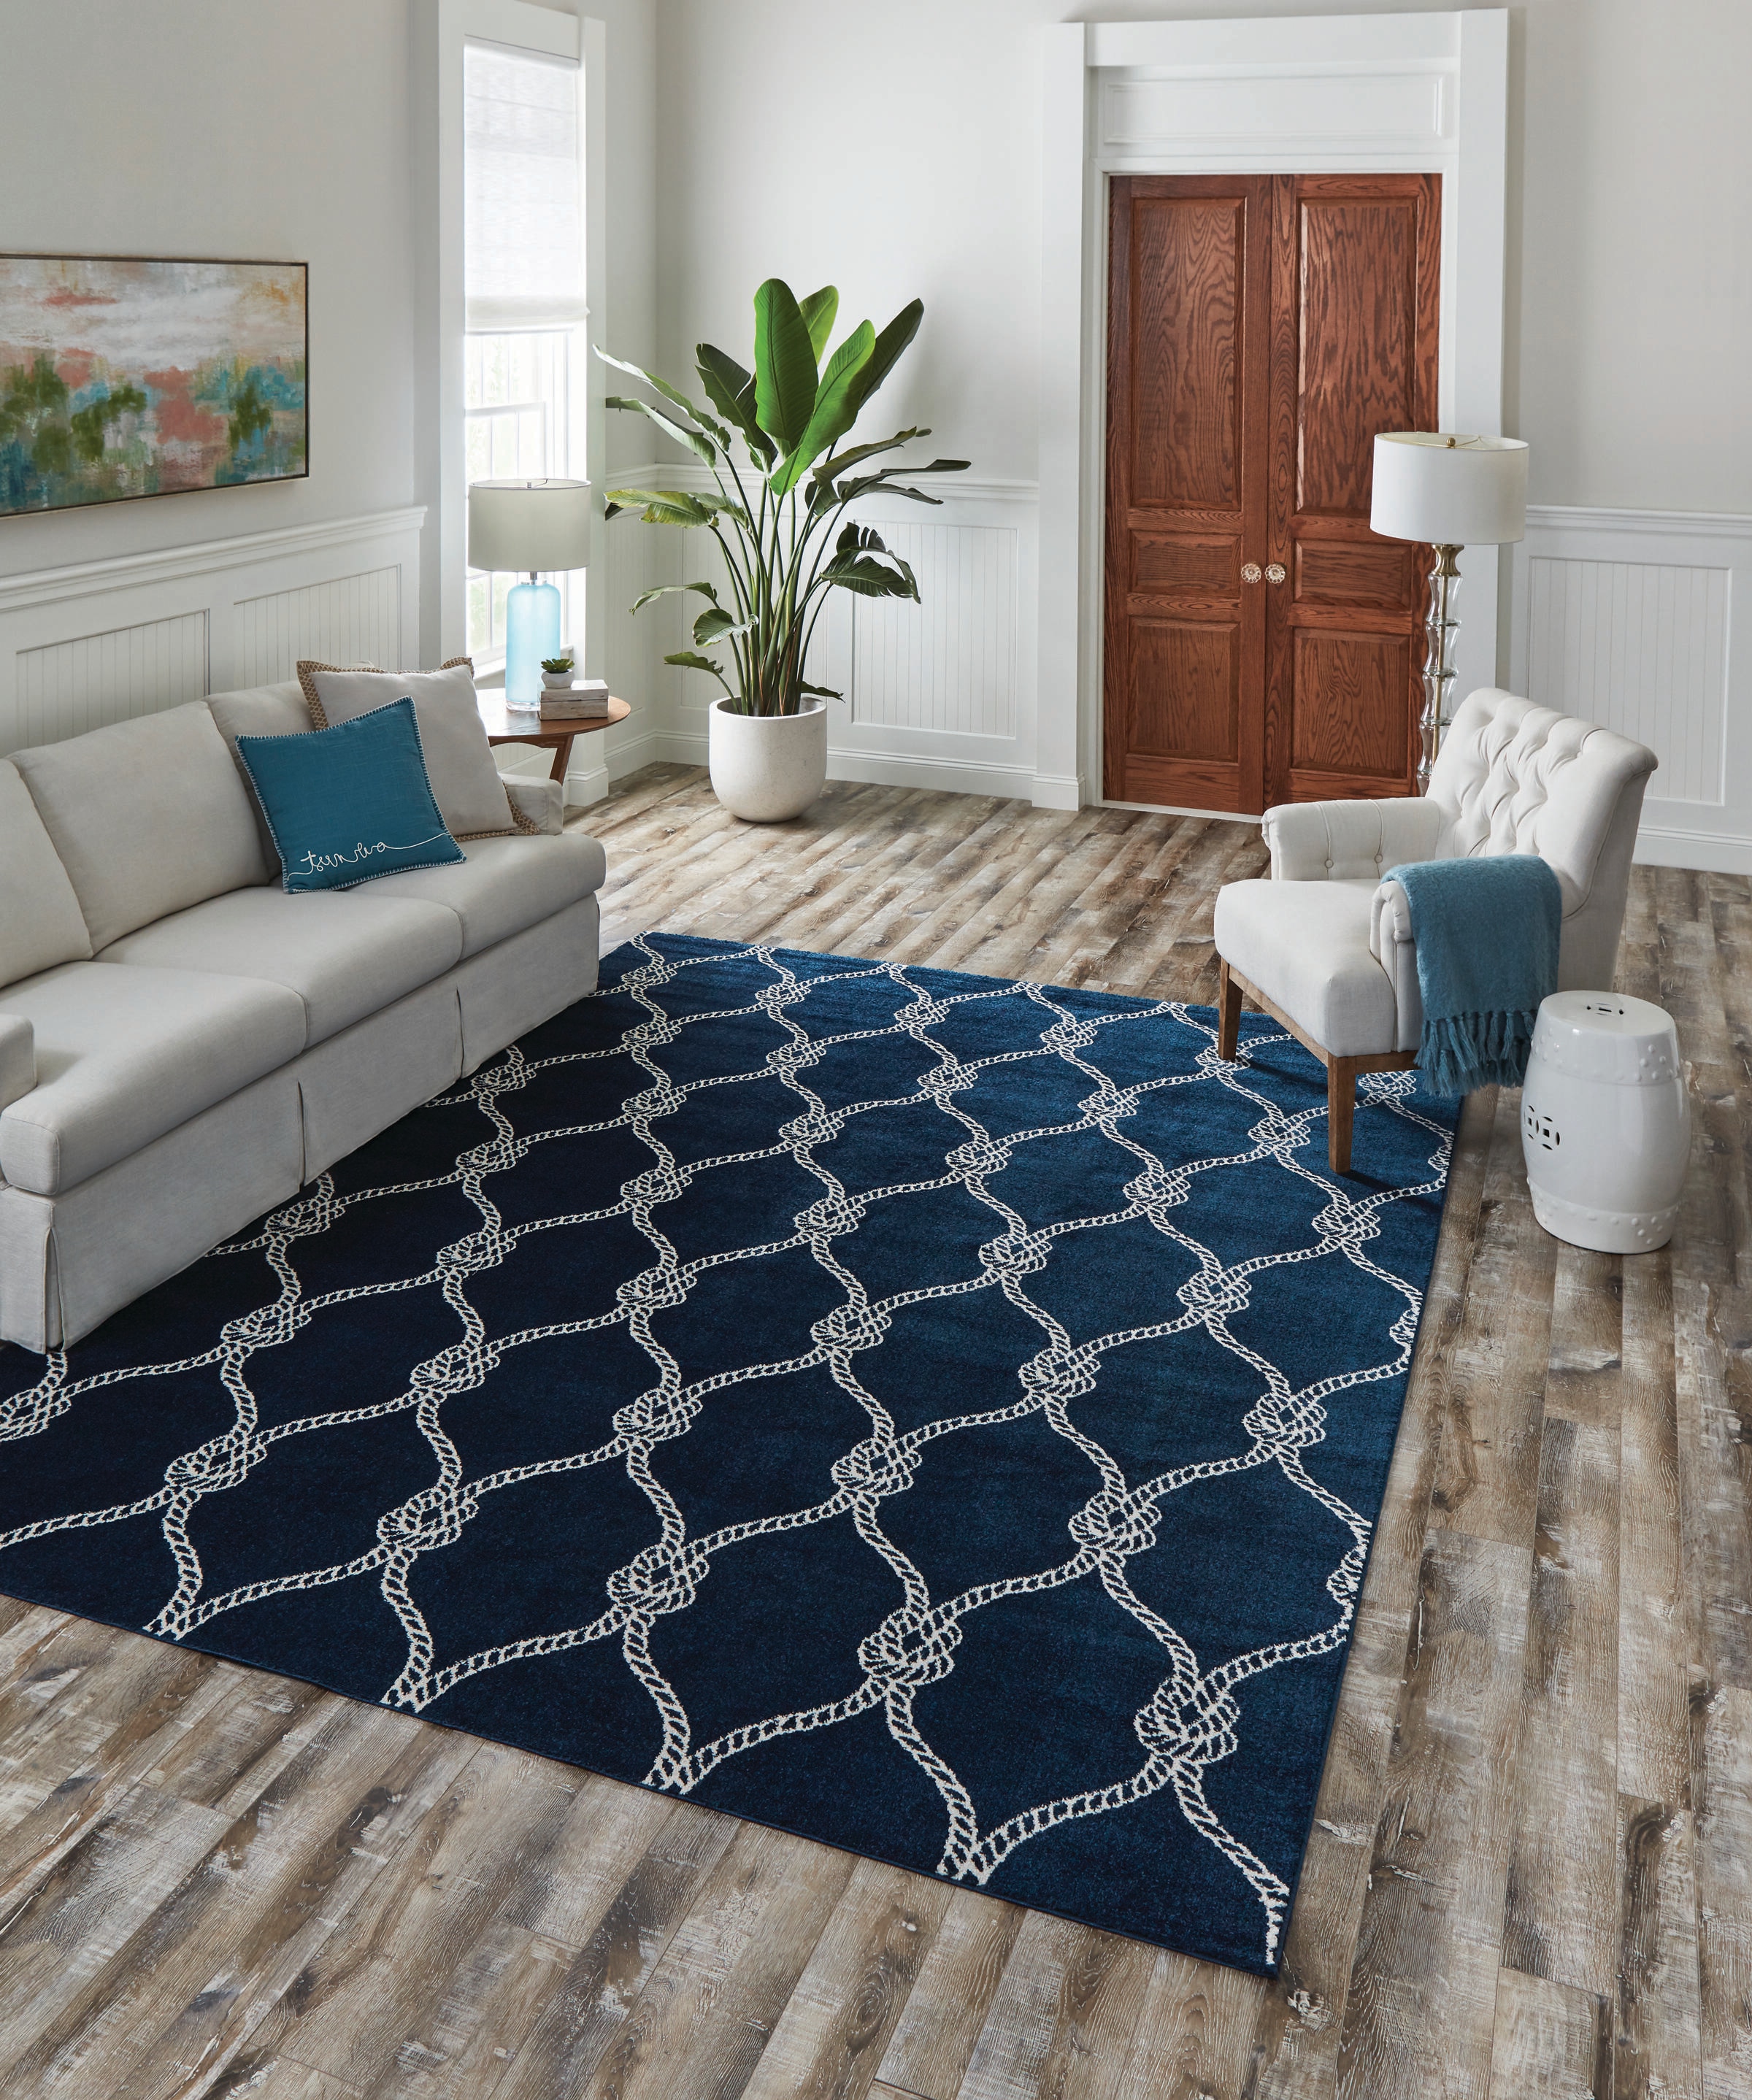 Area Rugs Chicago - View Blue Area Rugs at Beautiful Rugs Chicago